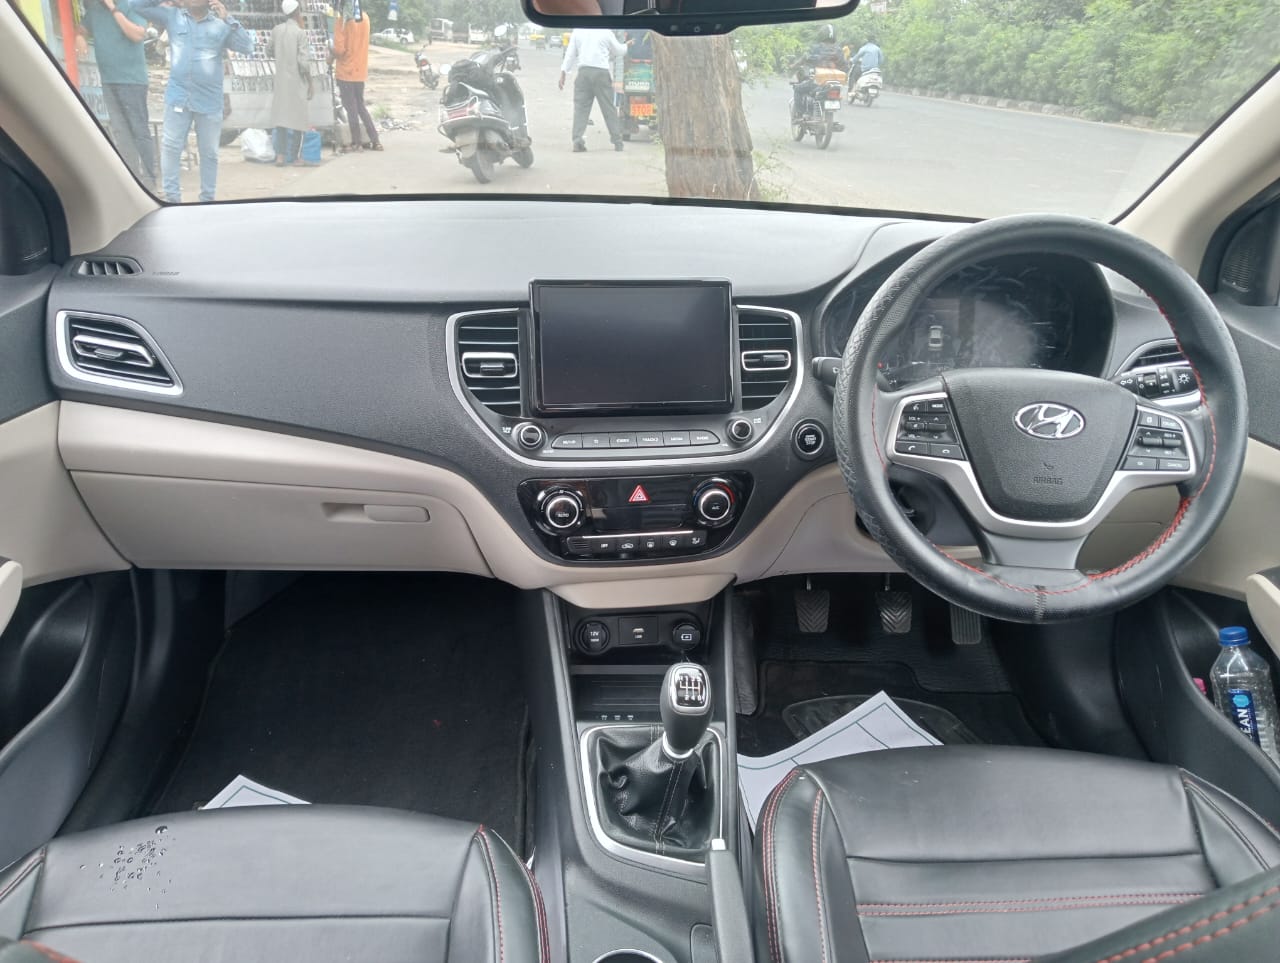 Details View - Hyundai Verna photos - reseller,reseller marketplace,advetising your products,reseller bazzar,resellerbazzar.in,india's classified site,Hyundai Varna , Old Hyundai Varna , Used Hyundai Varna  in Ahmedabad , Hyundai Varna in Ahmedabad